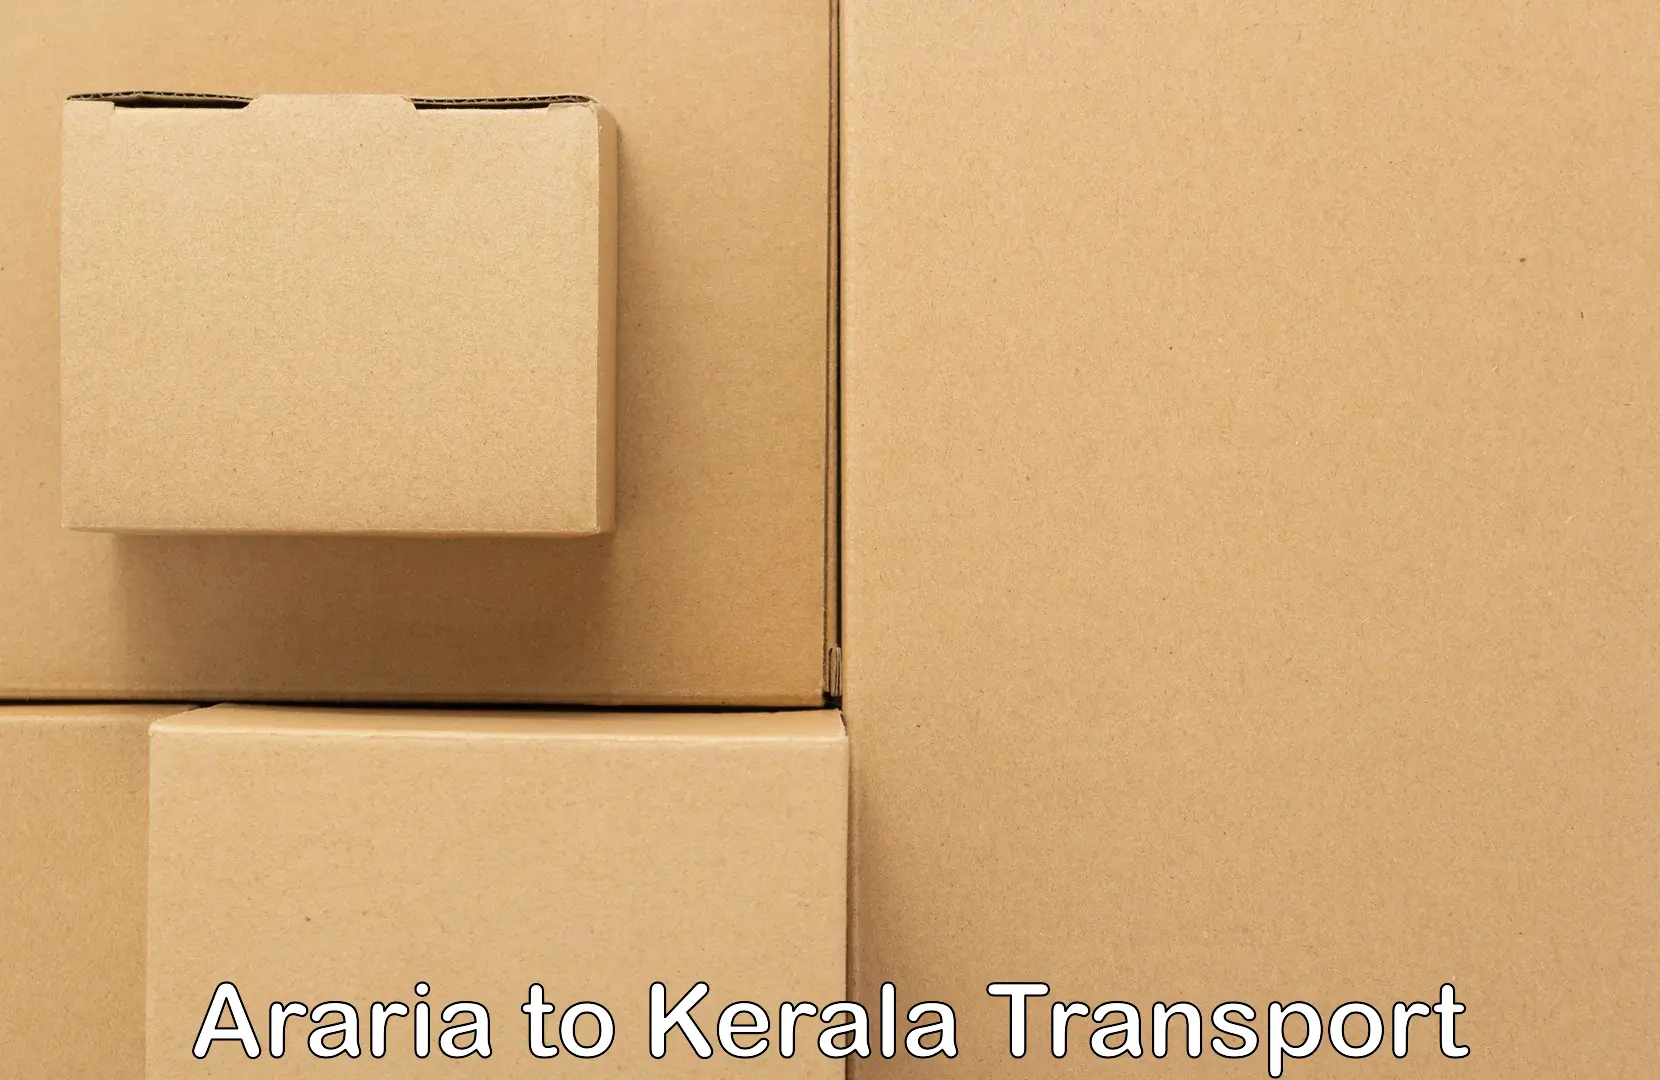 Parcel transport services Araria to Kochi